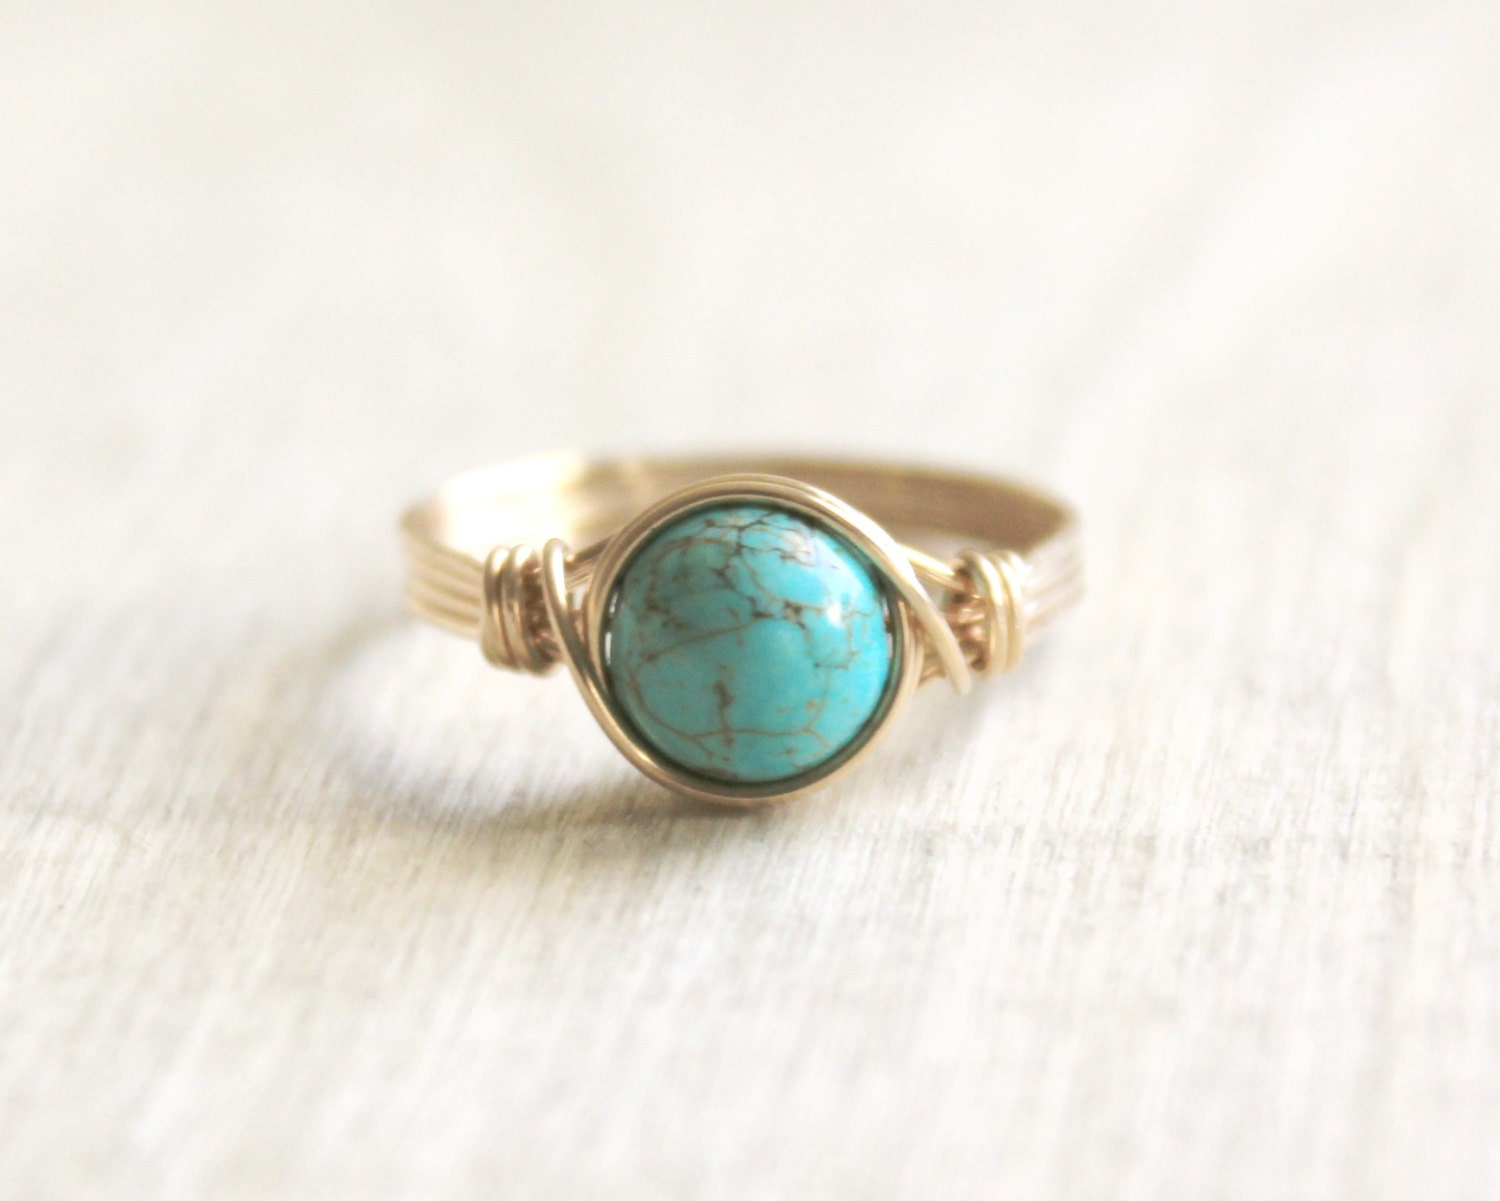 Turquoise Ring 14k Gold Filled Turquoise Wire Wrapped Ring